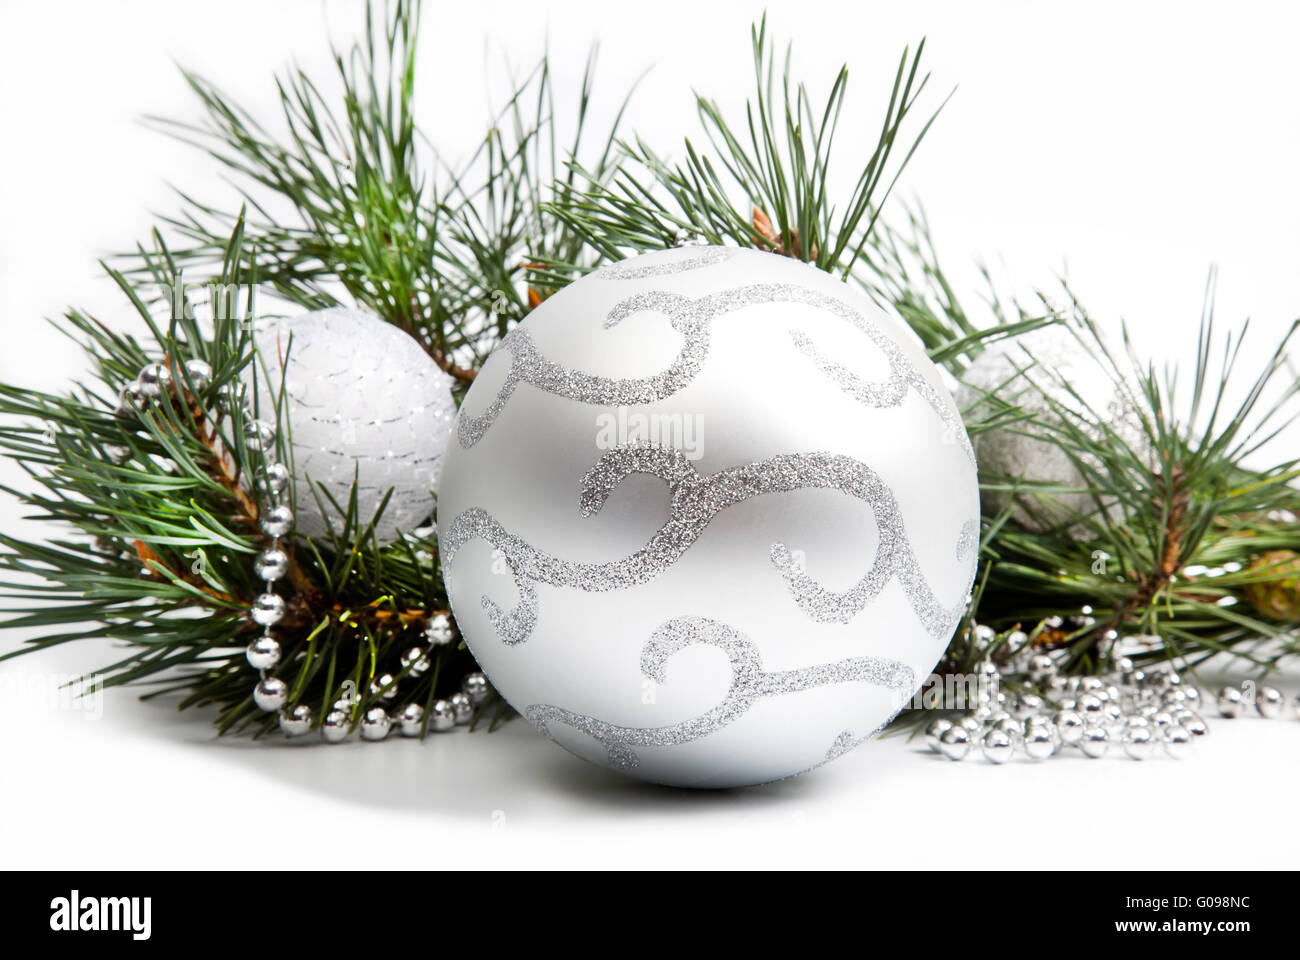 Christmas decorations with big silver ball and silver beads Stock Photo